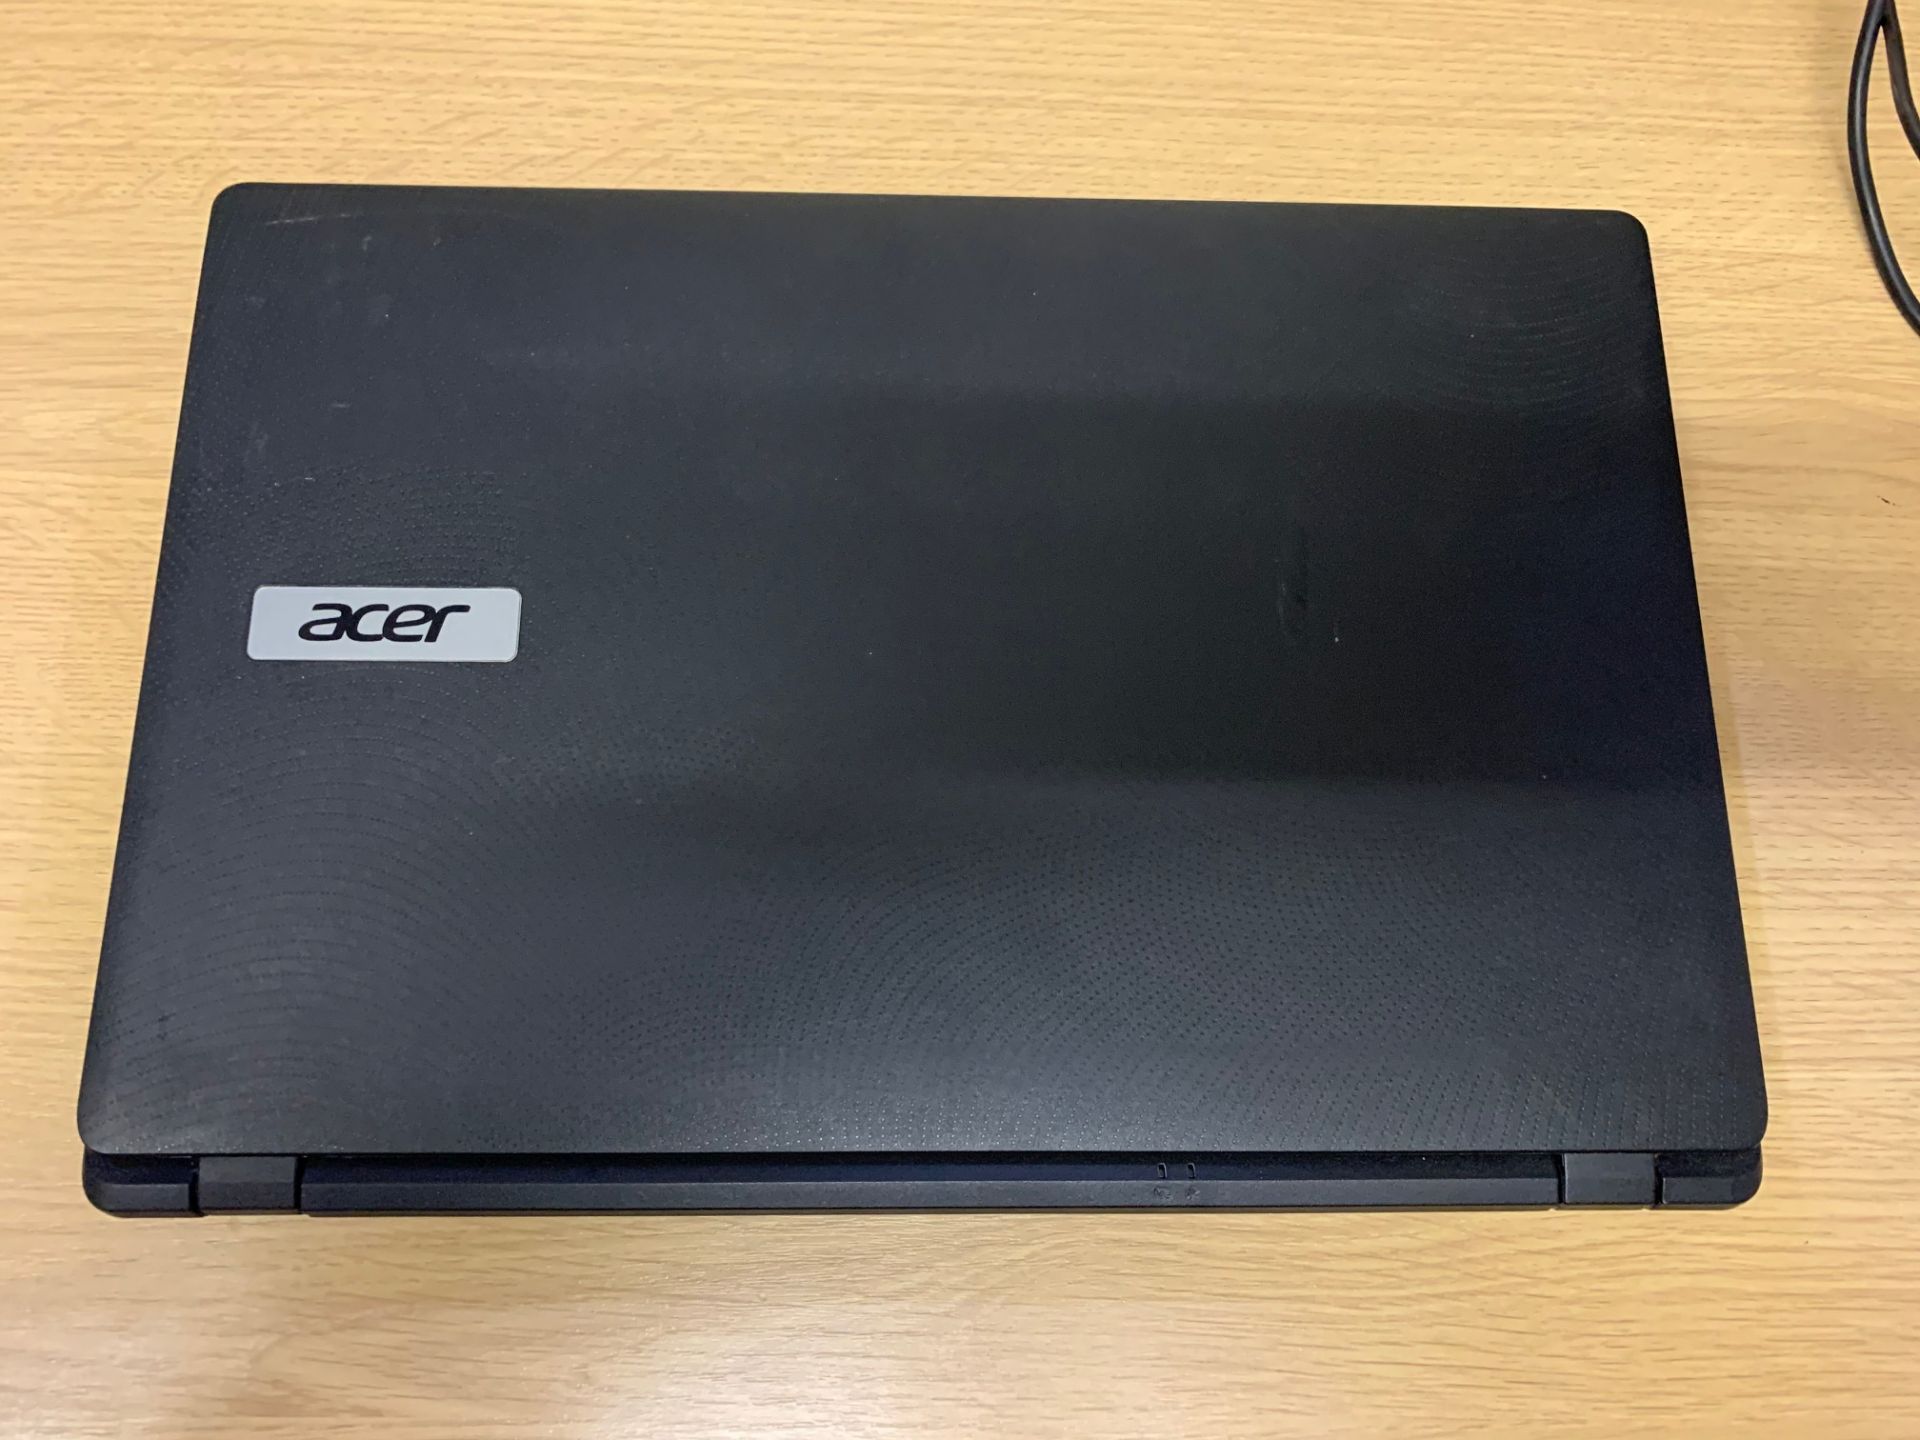 Acer E51-512 Laptop - 1TB Hard Drive, 4GB RAM, 15.6" Screen, Loaded With Windows 10 & Complete - Image 3 of 4